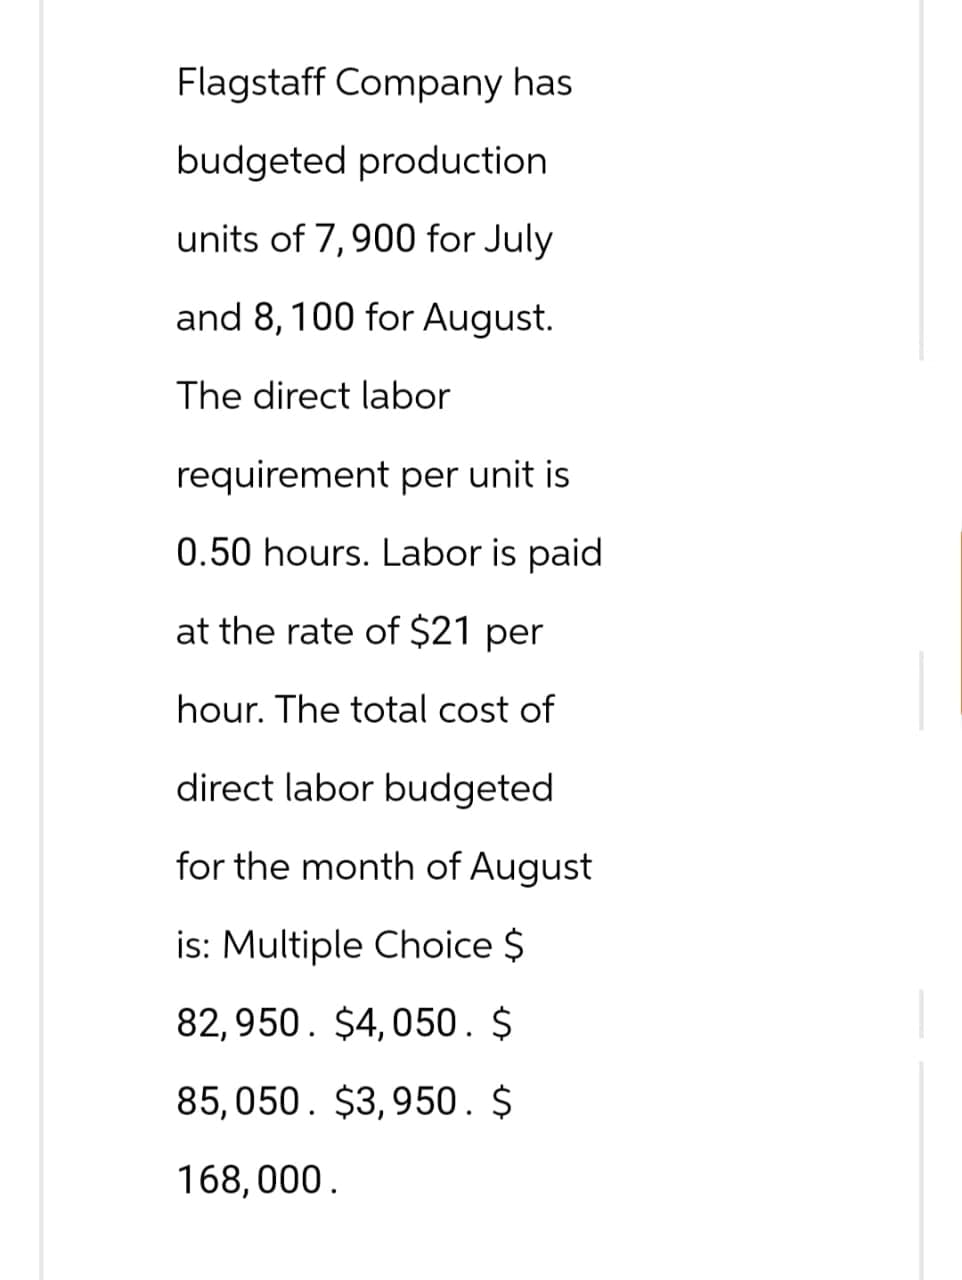 Flagstaff Company has
budgeted production
units of 7,900 for July
and 8, 100 for August.
The direct labor
requirement per unit is
0.50 hours. Labor is paid
at the rate of $21 per
hour. The total cost of
direct labor budgeted
for the month of August
is: Multiple Choice $
82,950 $4,050. $
85,050. $3,950. $
168,000.